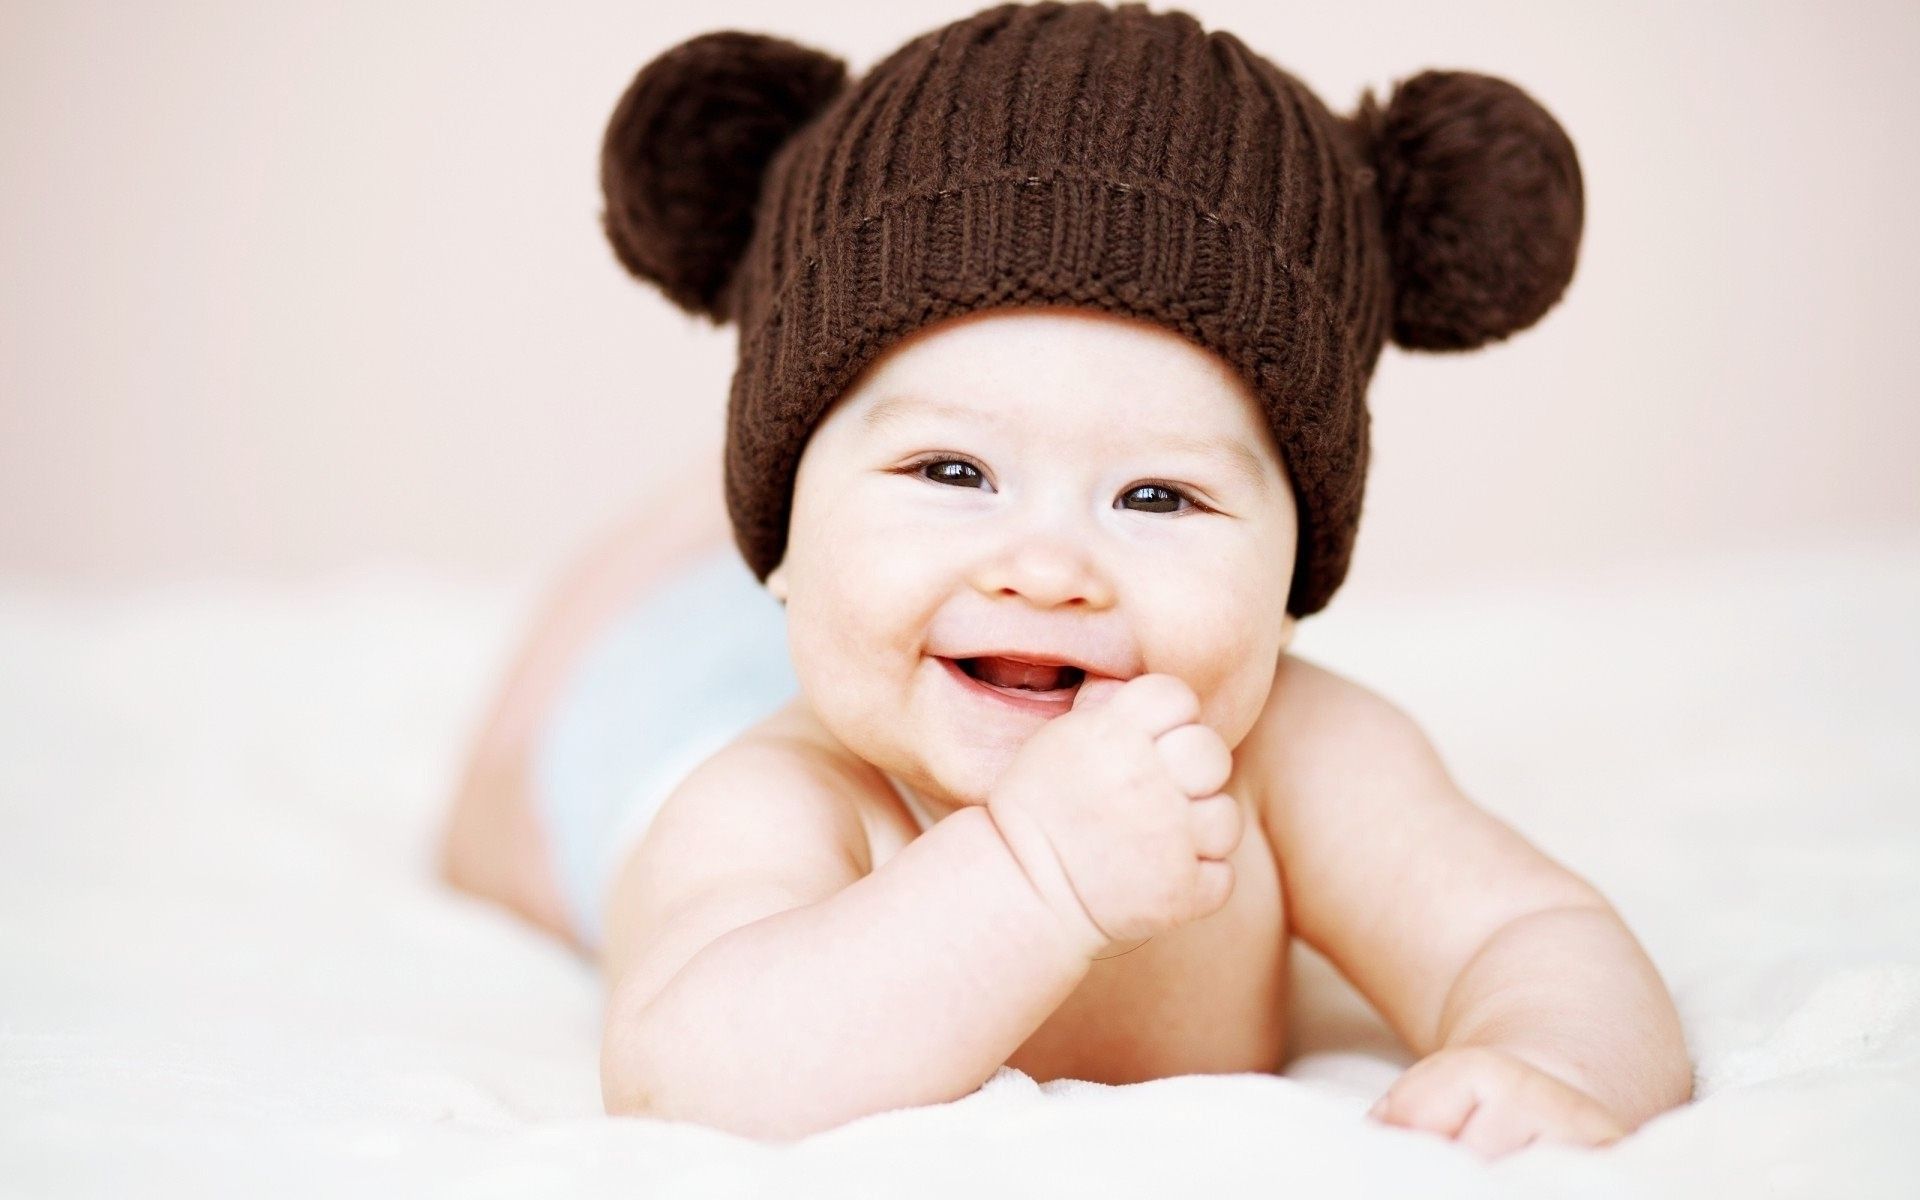 Nature Wallpapers Cute Babies Wallpapers.